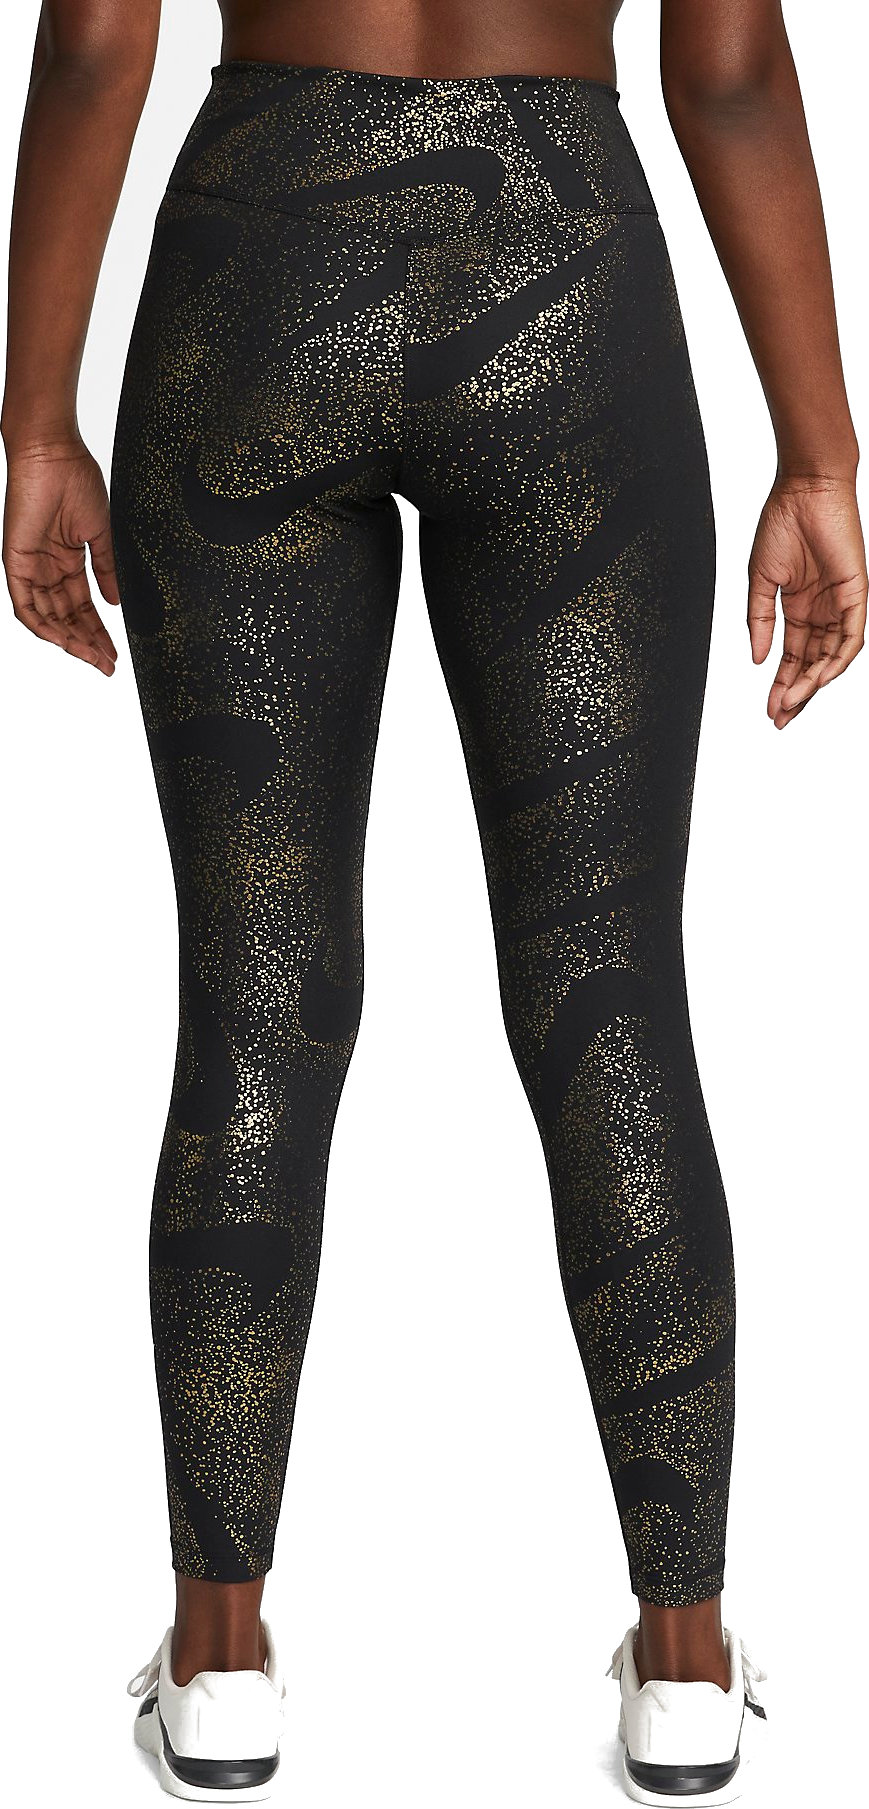 https://i1.t4s.cz/products/dq6308-010/nike-dri-fit-one-women-s-mid-rise-allover-print-leggings-513157-dq6308-011.jpg